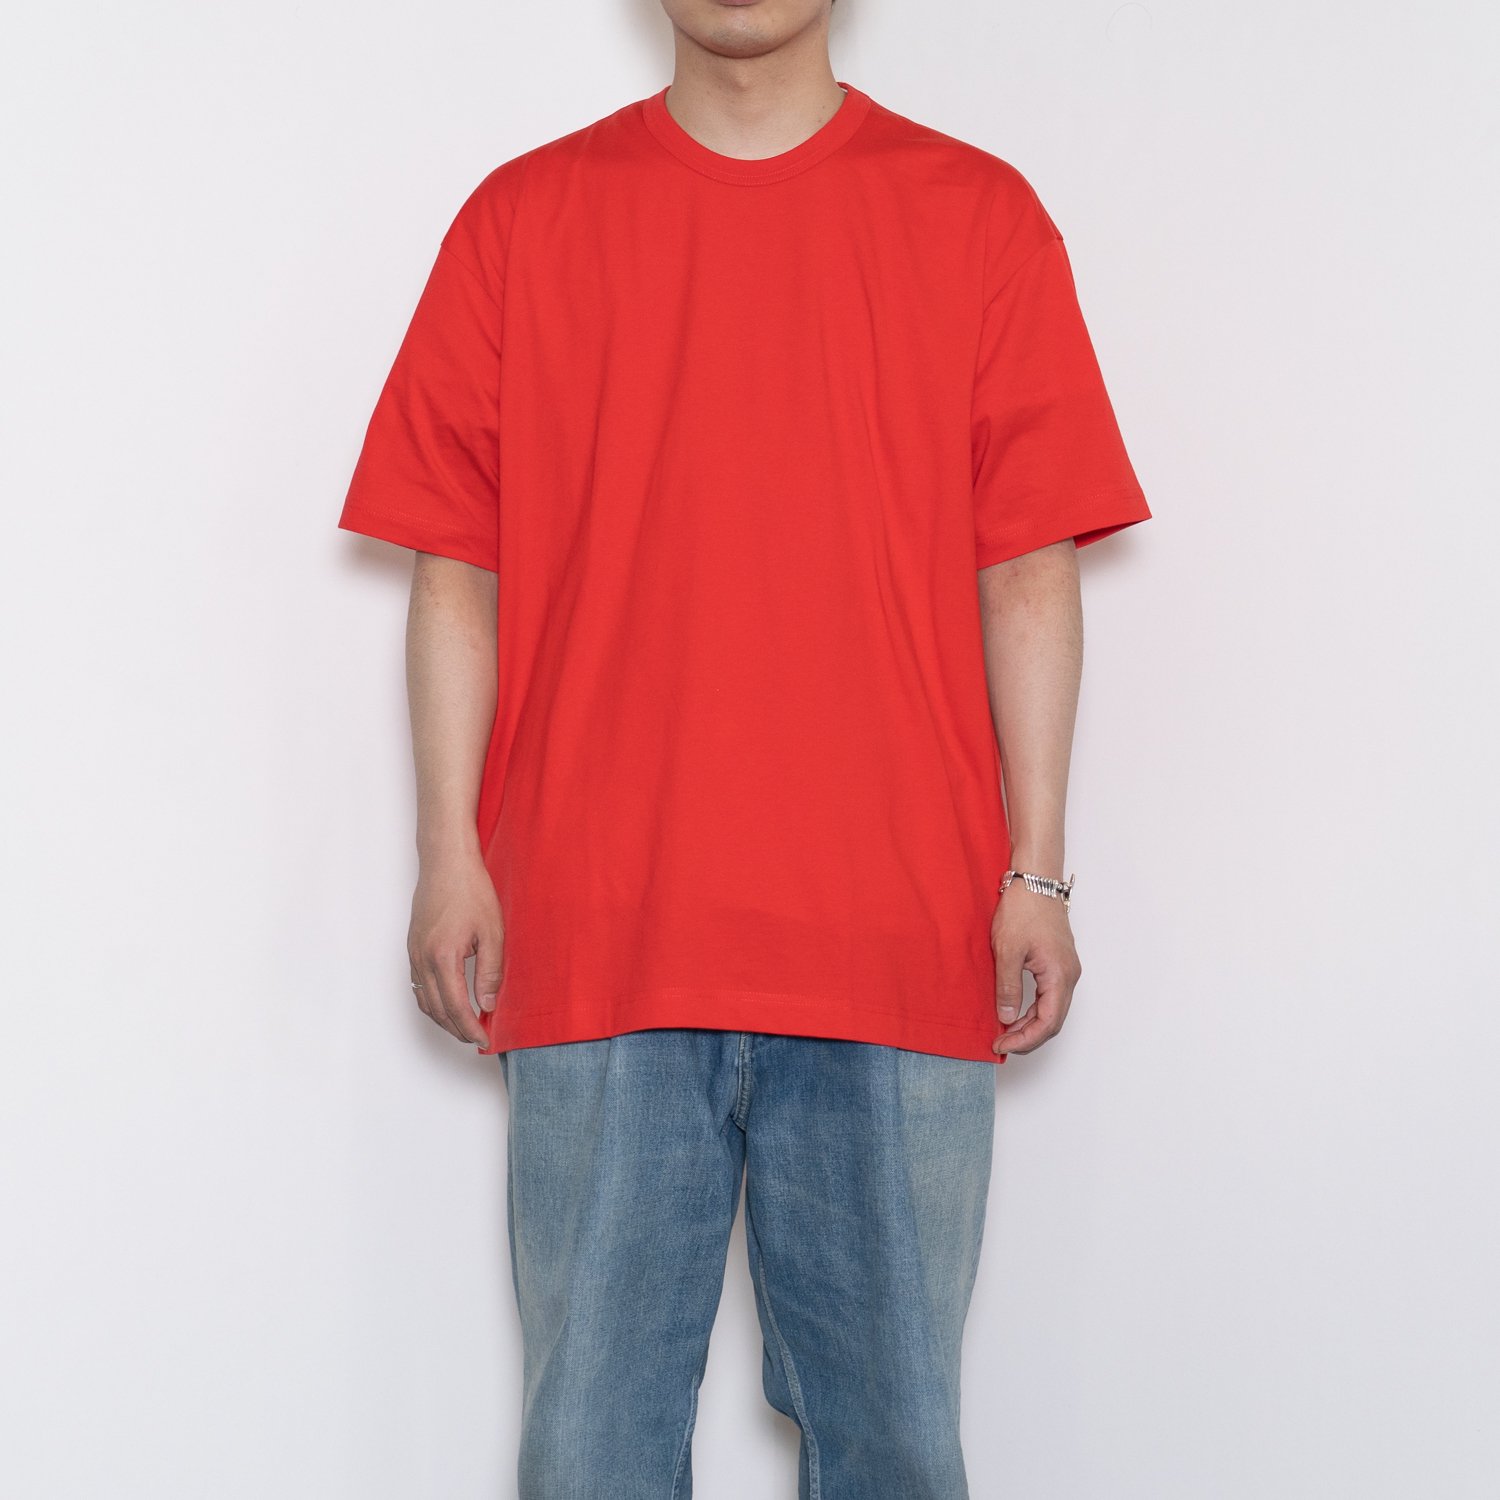 COMME des GARCONS SHIRT * 23SS COLLECTION Oversized Tee w/ back logo(4色展開)